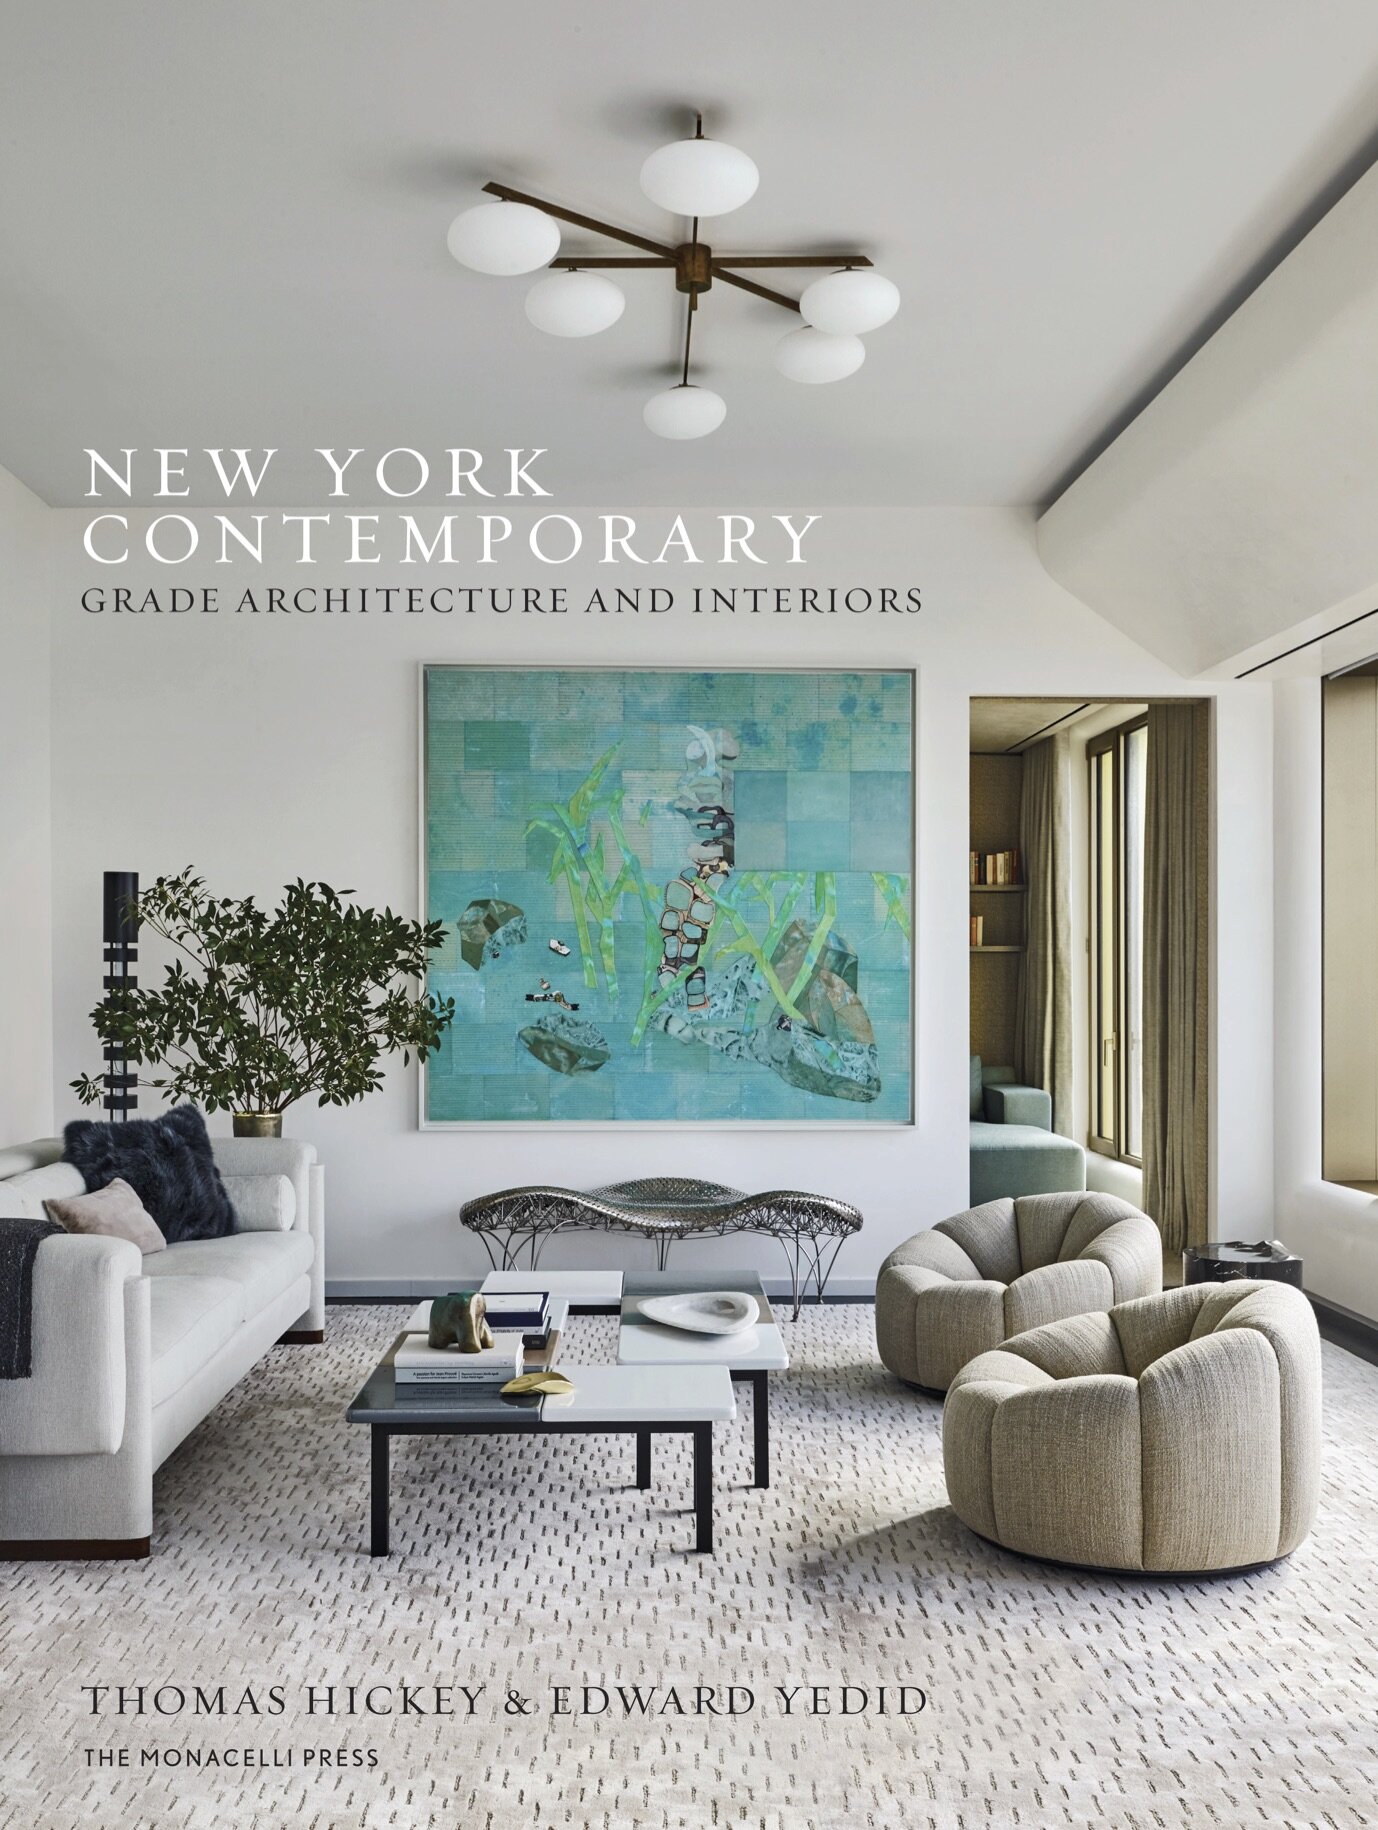 Architect Thomas Hickey and interior designer Edward Yedid partnered to establish GRADE New York as a unique practice where architecture and interiors merge into a seamless continuum. Within their refined and beautifully proportioned spaces, a metic…